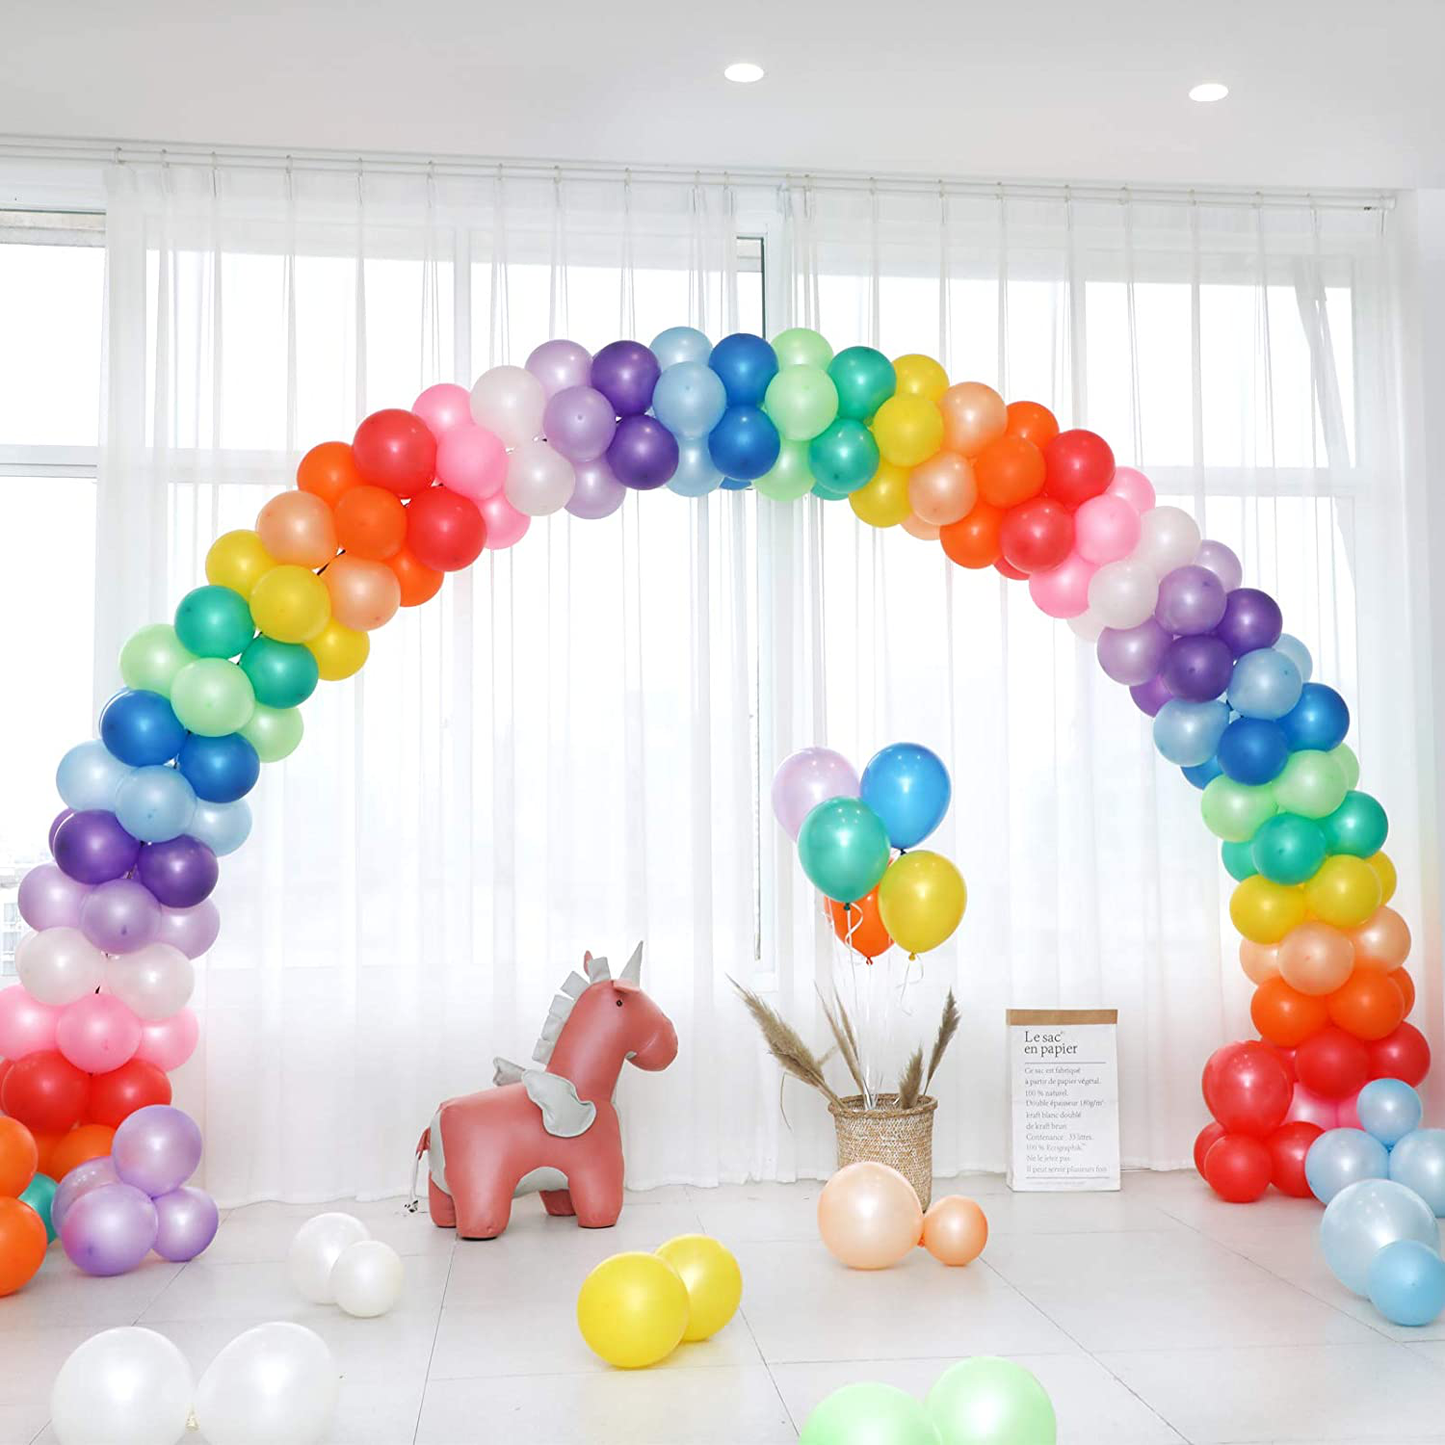 RUBFAC 120 Balloons Assorted Color 12 Inches 12 Kinds of Rainbow Latex Balloons, Multicolor Bright Balloons for Party Decoration, Birthday Party Supplies or Arch Decoration